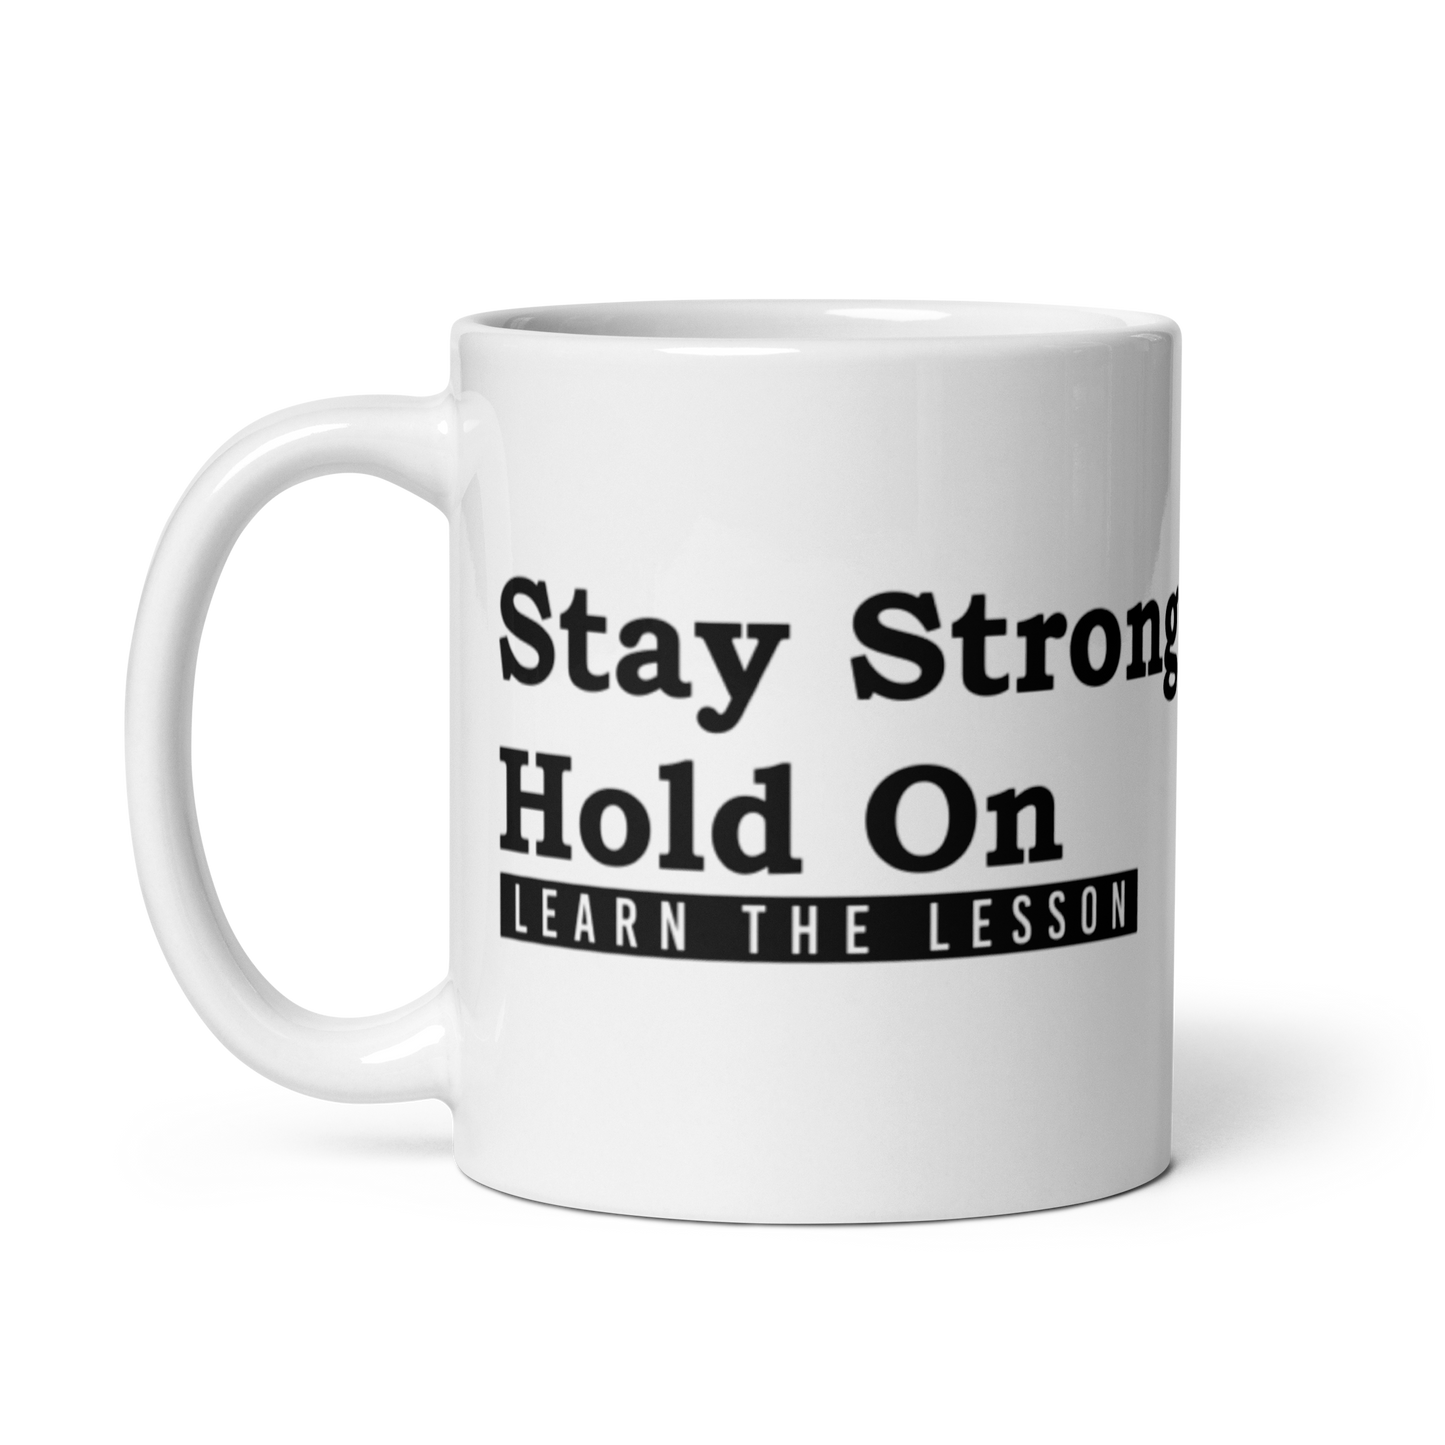 Stay Strong. Hold on. Learn the Lesson. White Glossy Mug KimUnity Soulutions 